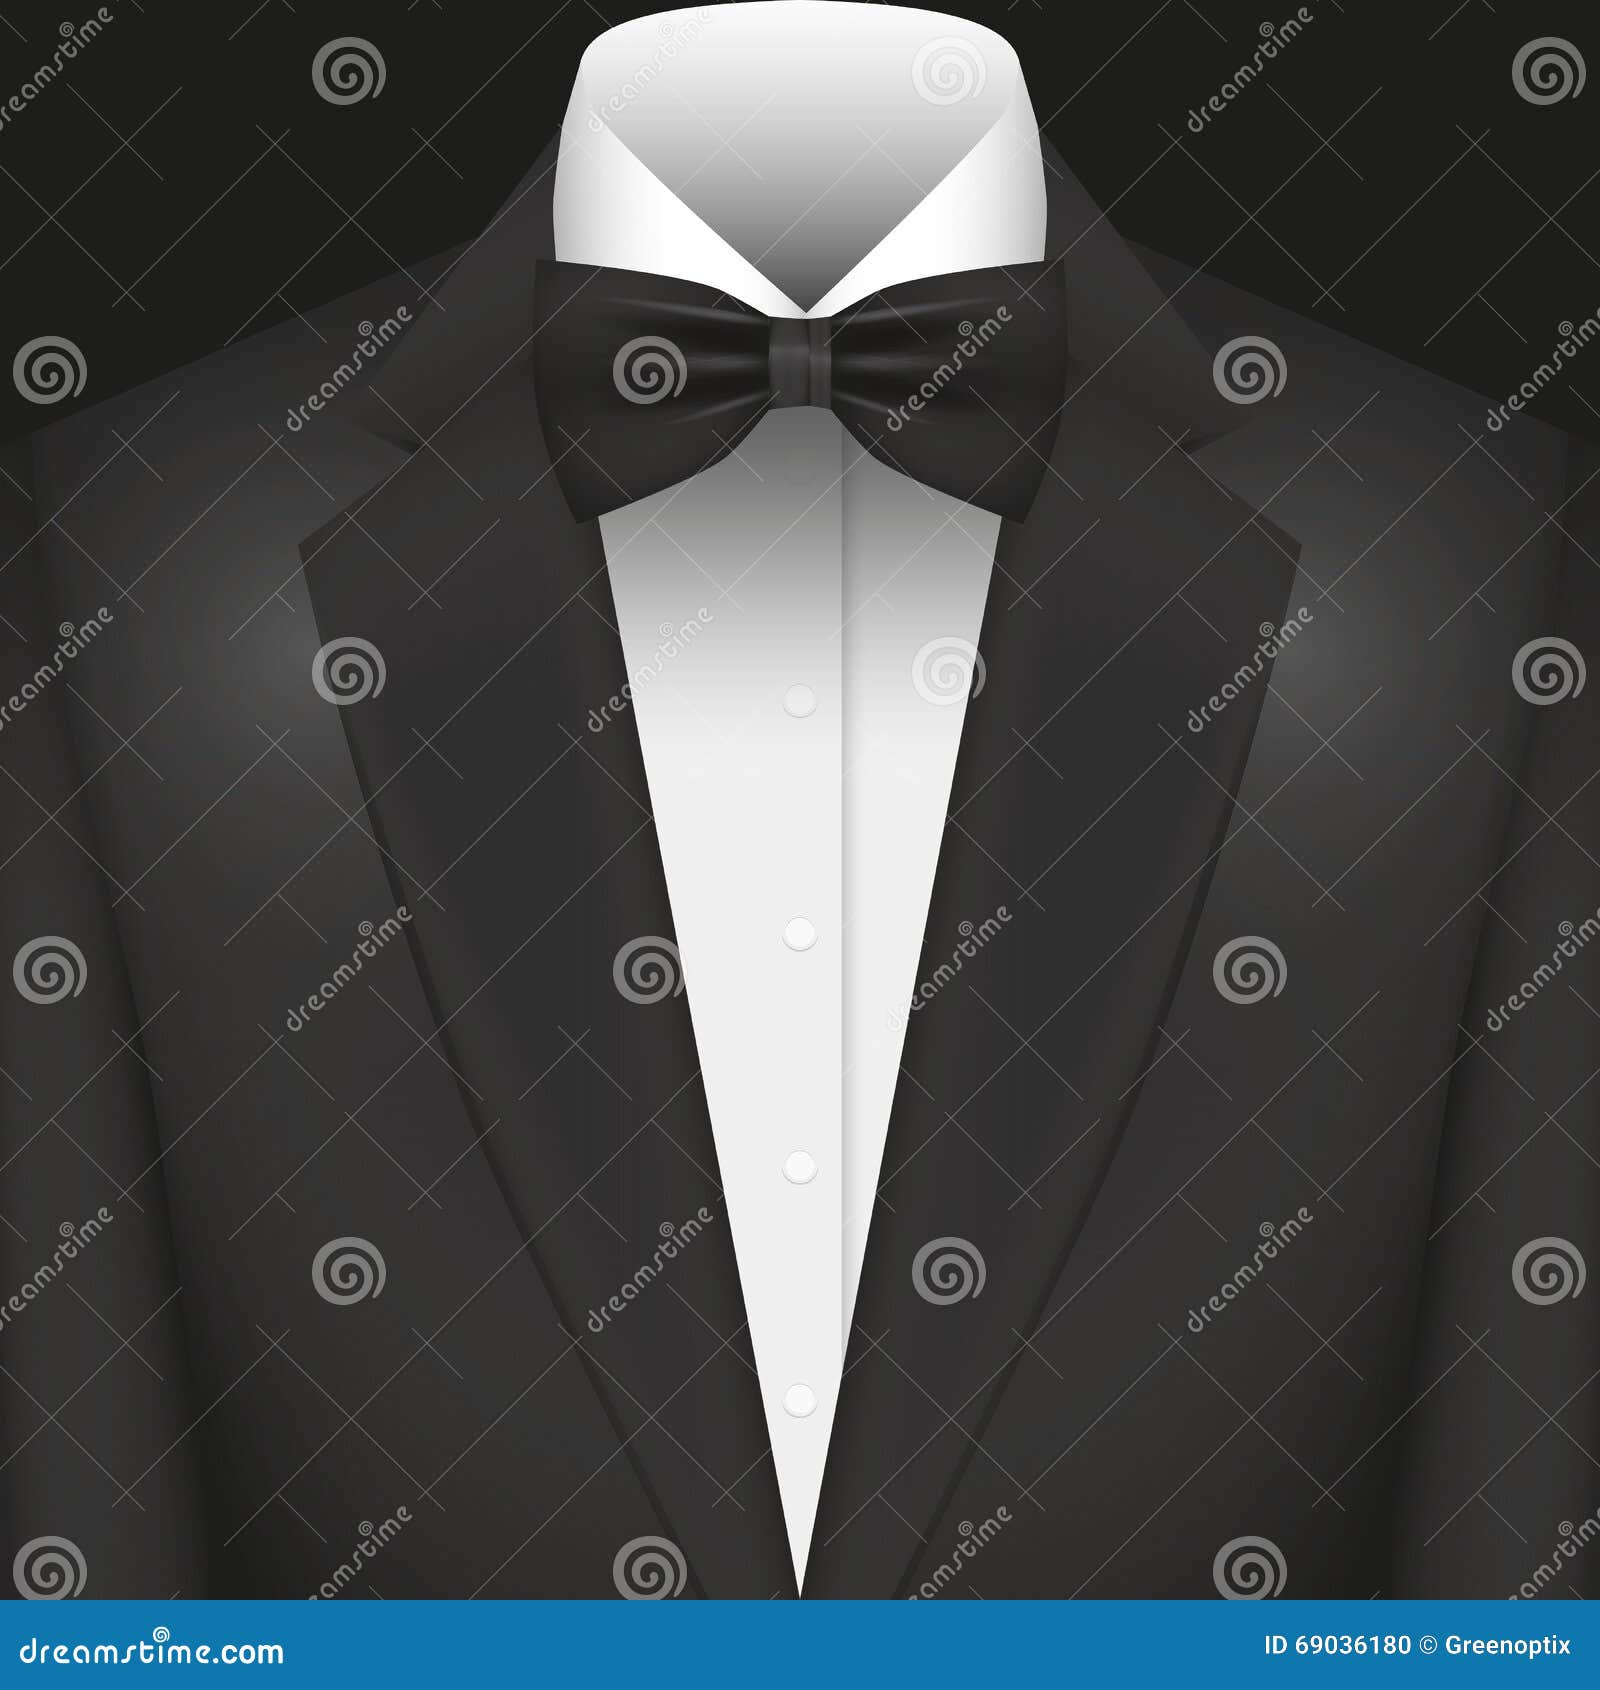 Illustration Vector Graphic Suit with Bow Tie Stock Illustration ...